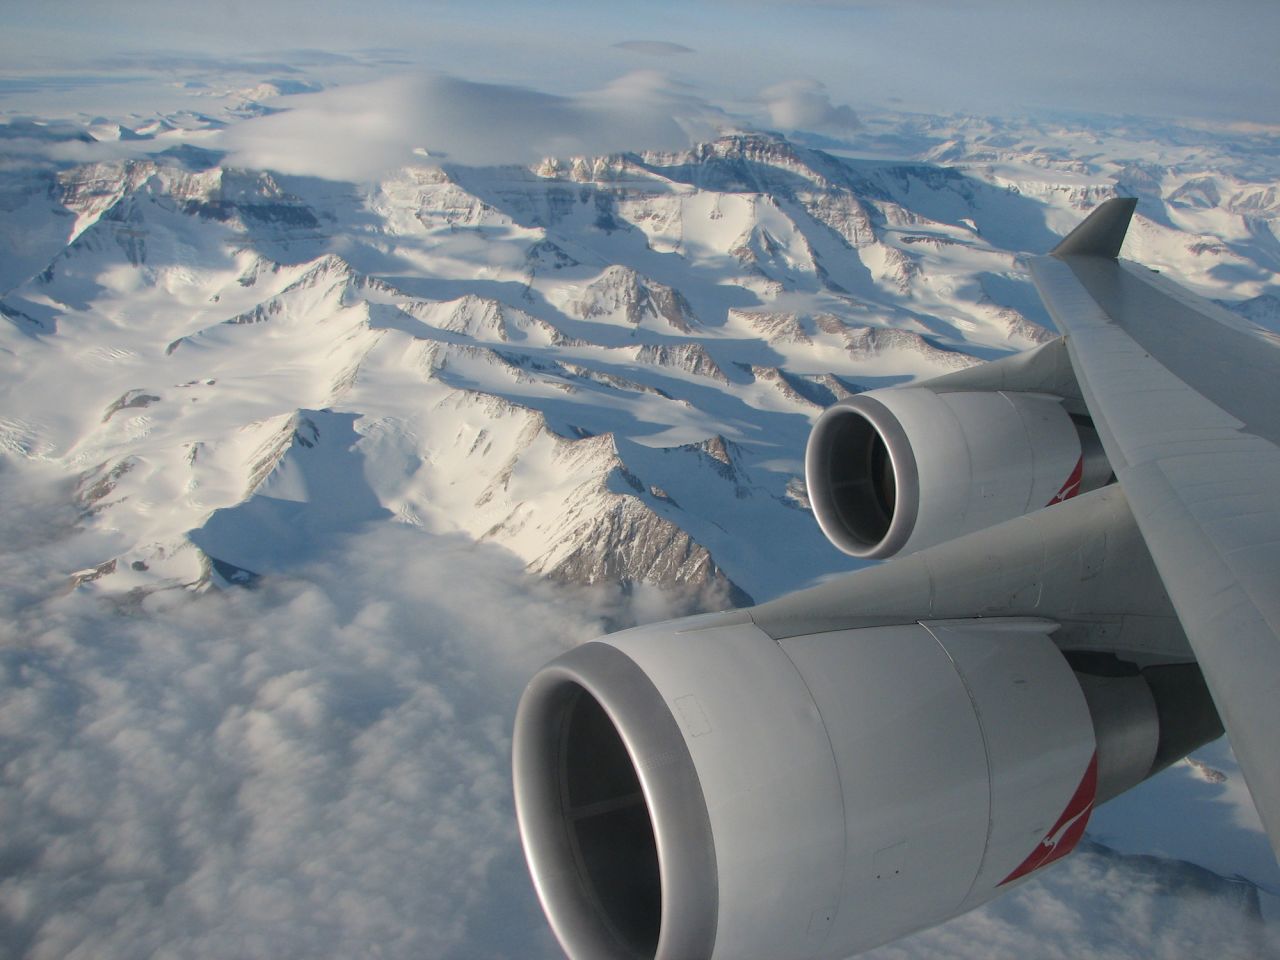 <a href="http://www.antarcticaflights.com.au/" target="_blank" target="_blank">Antarctica Flights</a> is chartering a Qantas 747 from Melbourne on February 14th for a special flight over pristine landscapes, icebergs and glaciers.